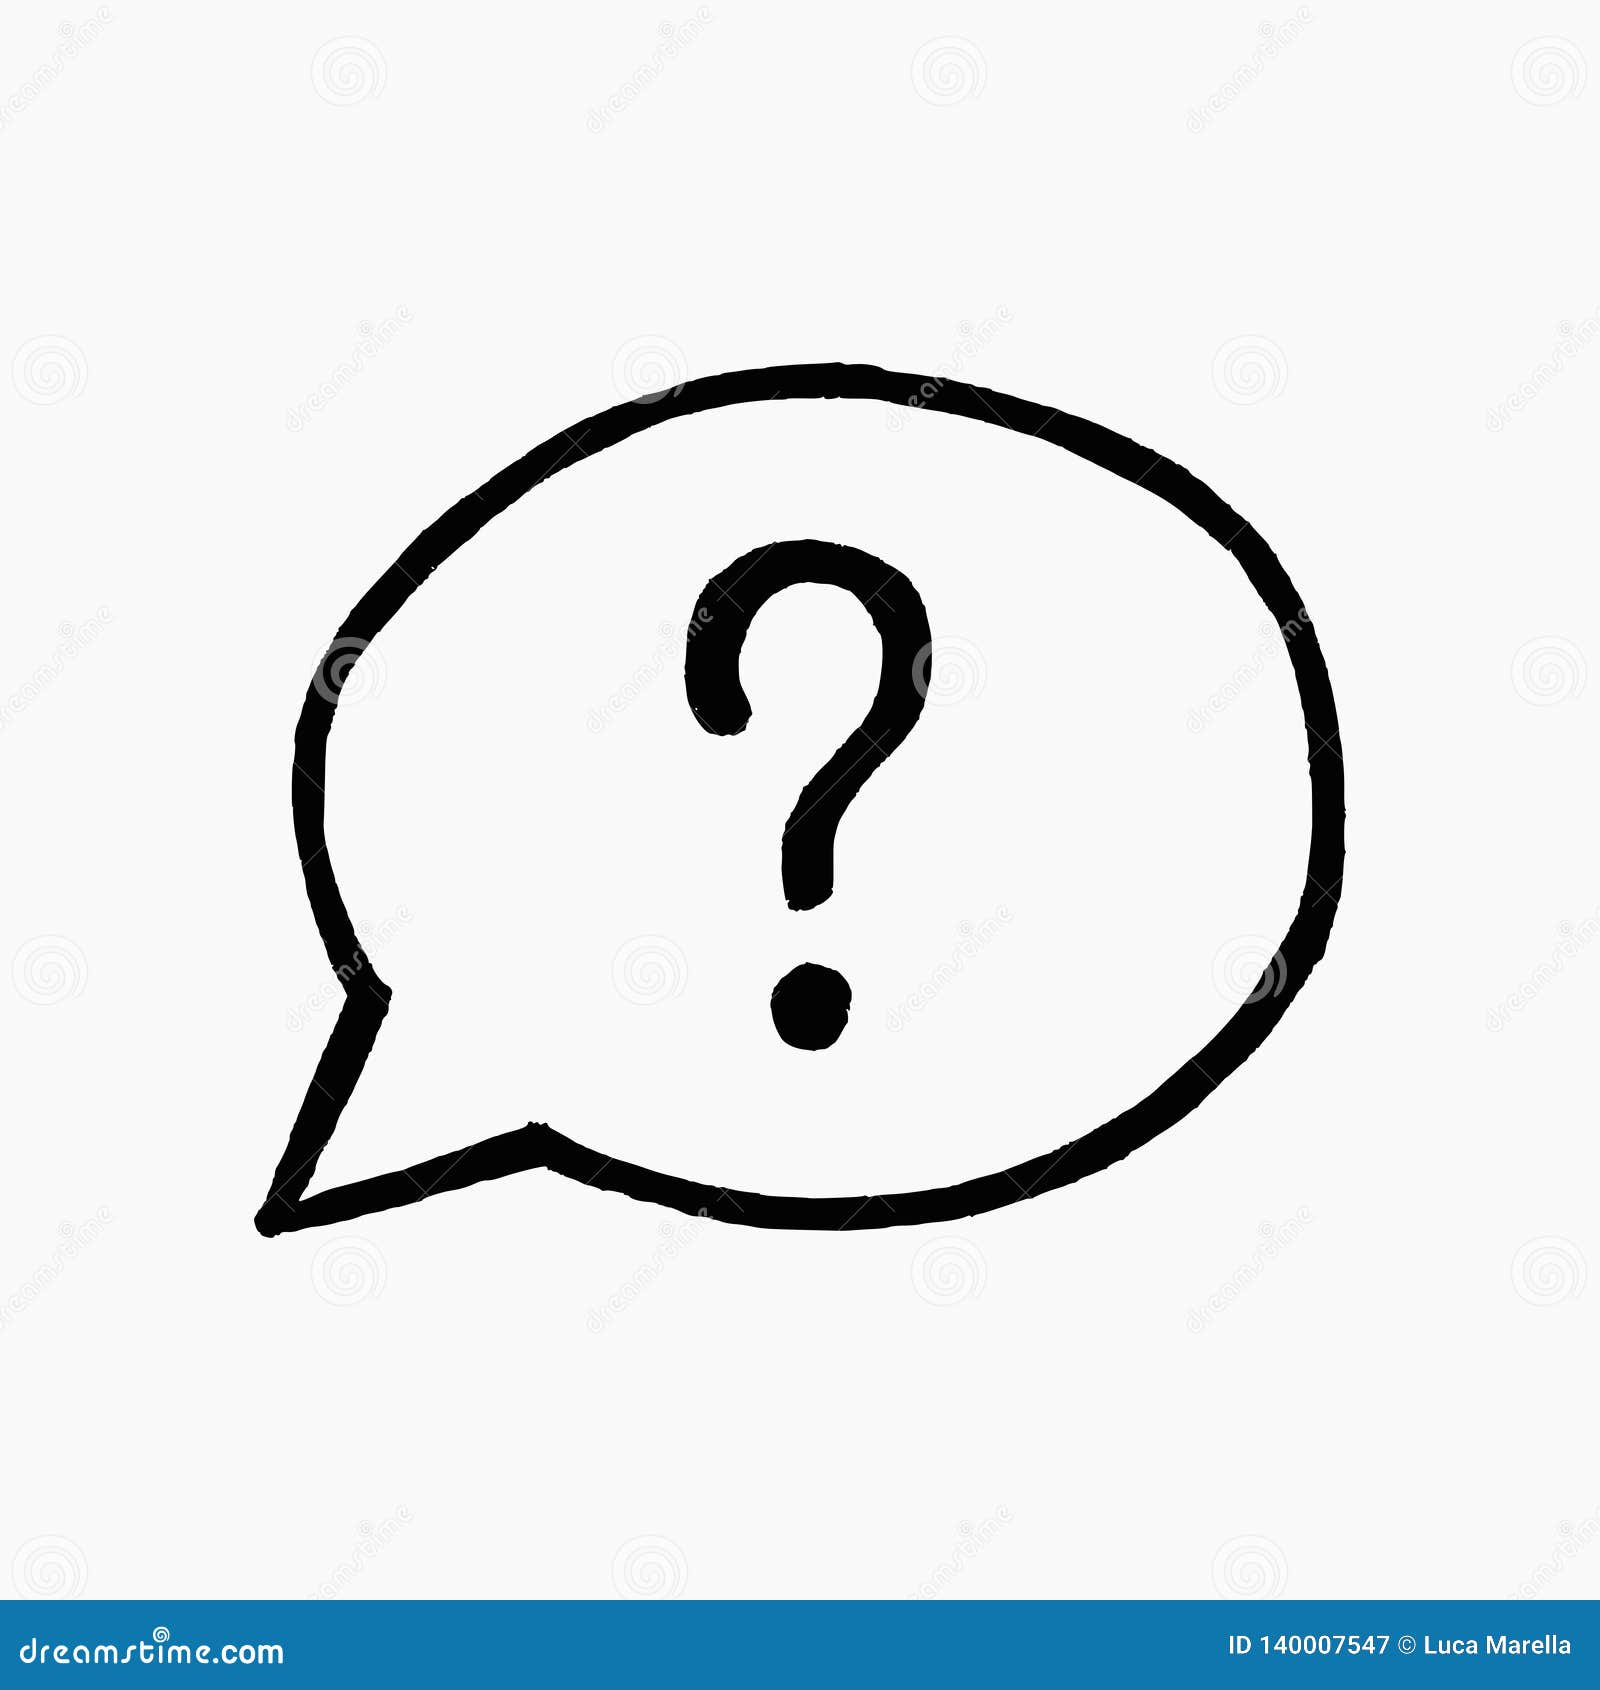 Hand Drawn Vector Illustration Of Speech Bubble With A Question Mark ...